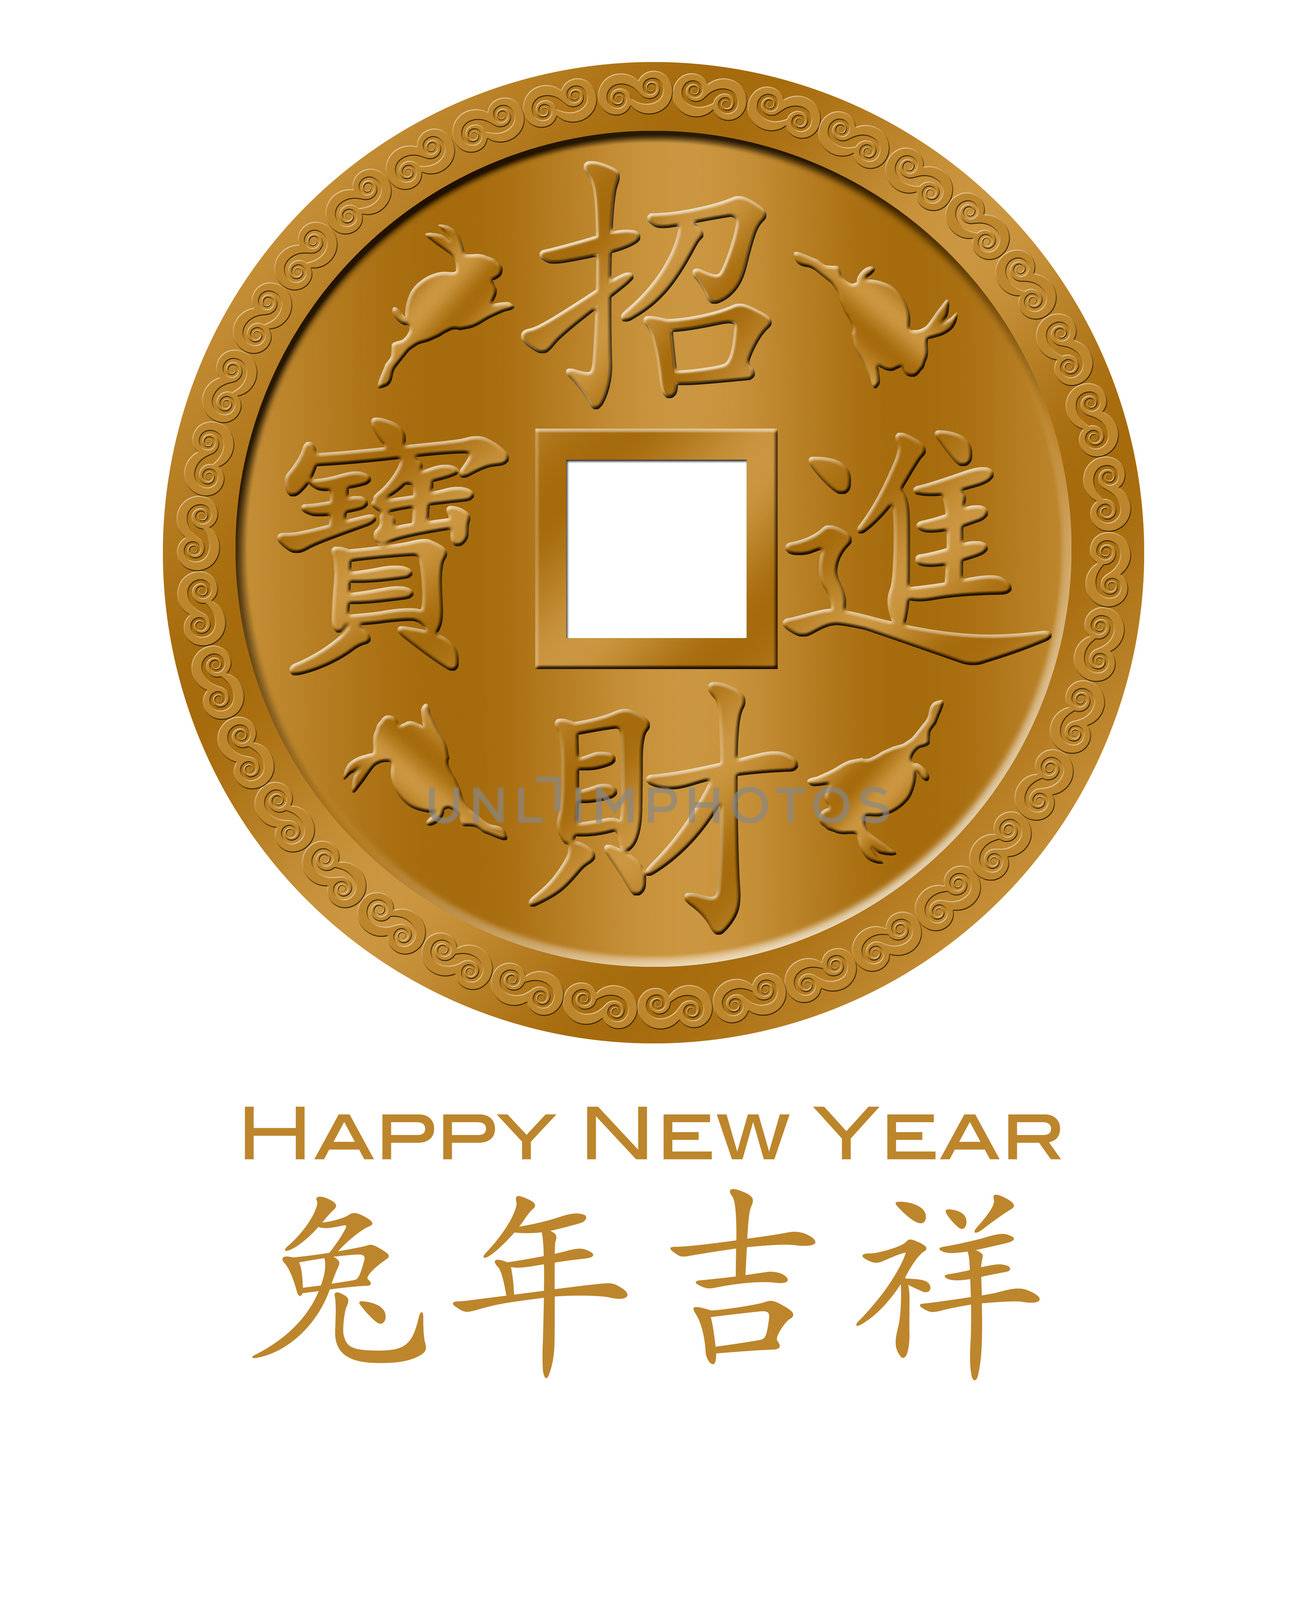 Happy New Year of the Rabbit 2011 Chinese Gold Coin Illustration